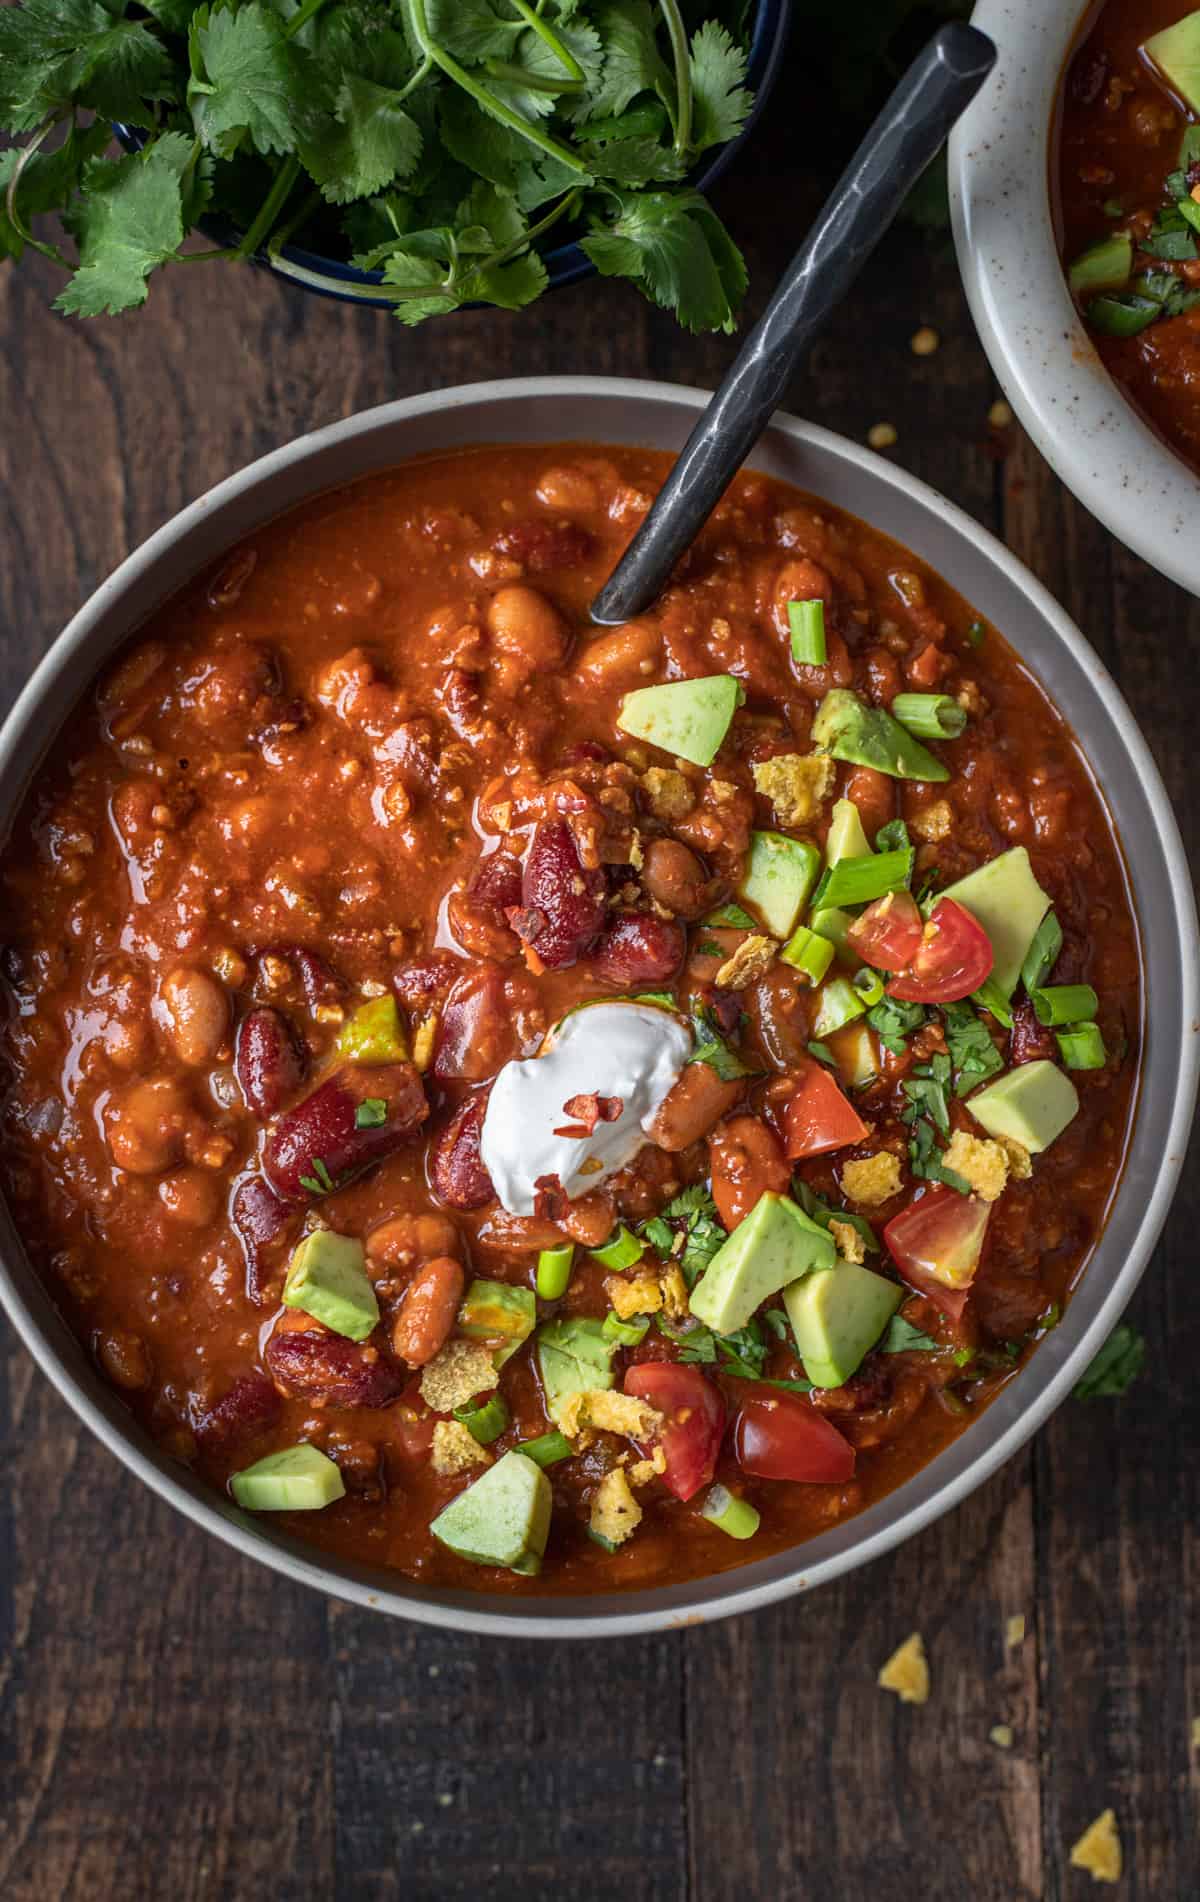 Bowlful of vegan chili topped with avocado, tomatoes, and sour cream.